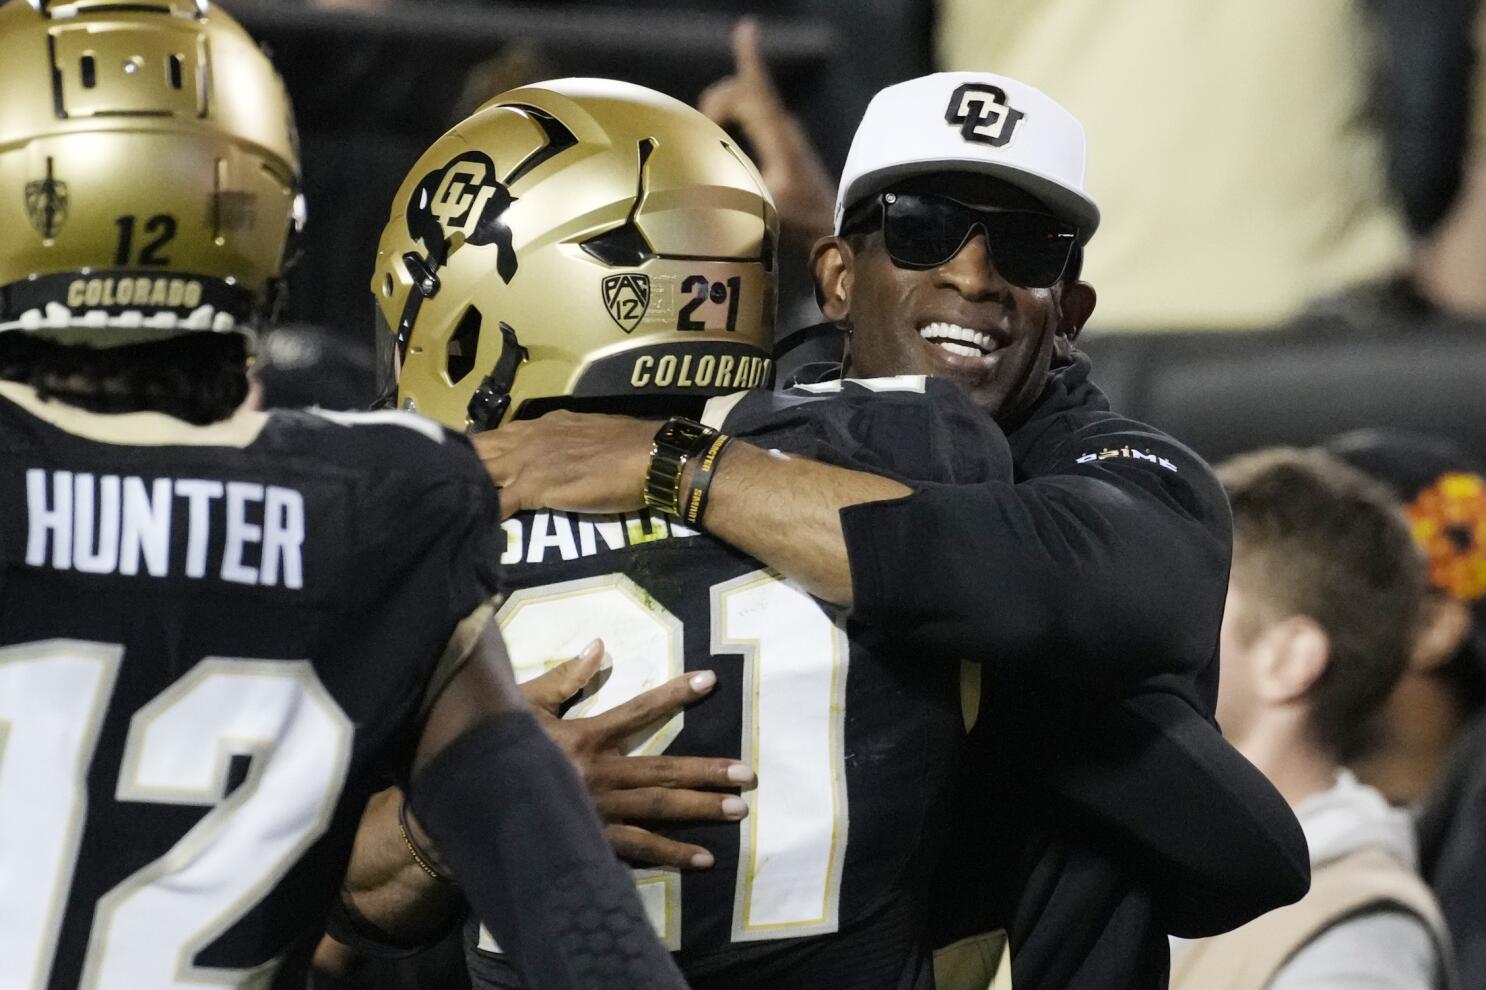 Deion Sanders, Distraught, Asks Athletes to “Not Take Shots” as They Depart Colorado